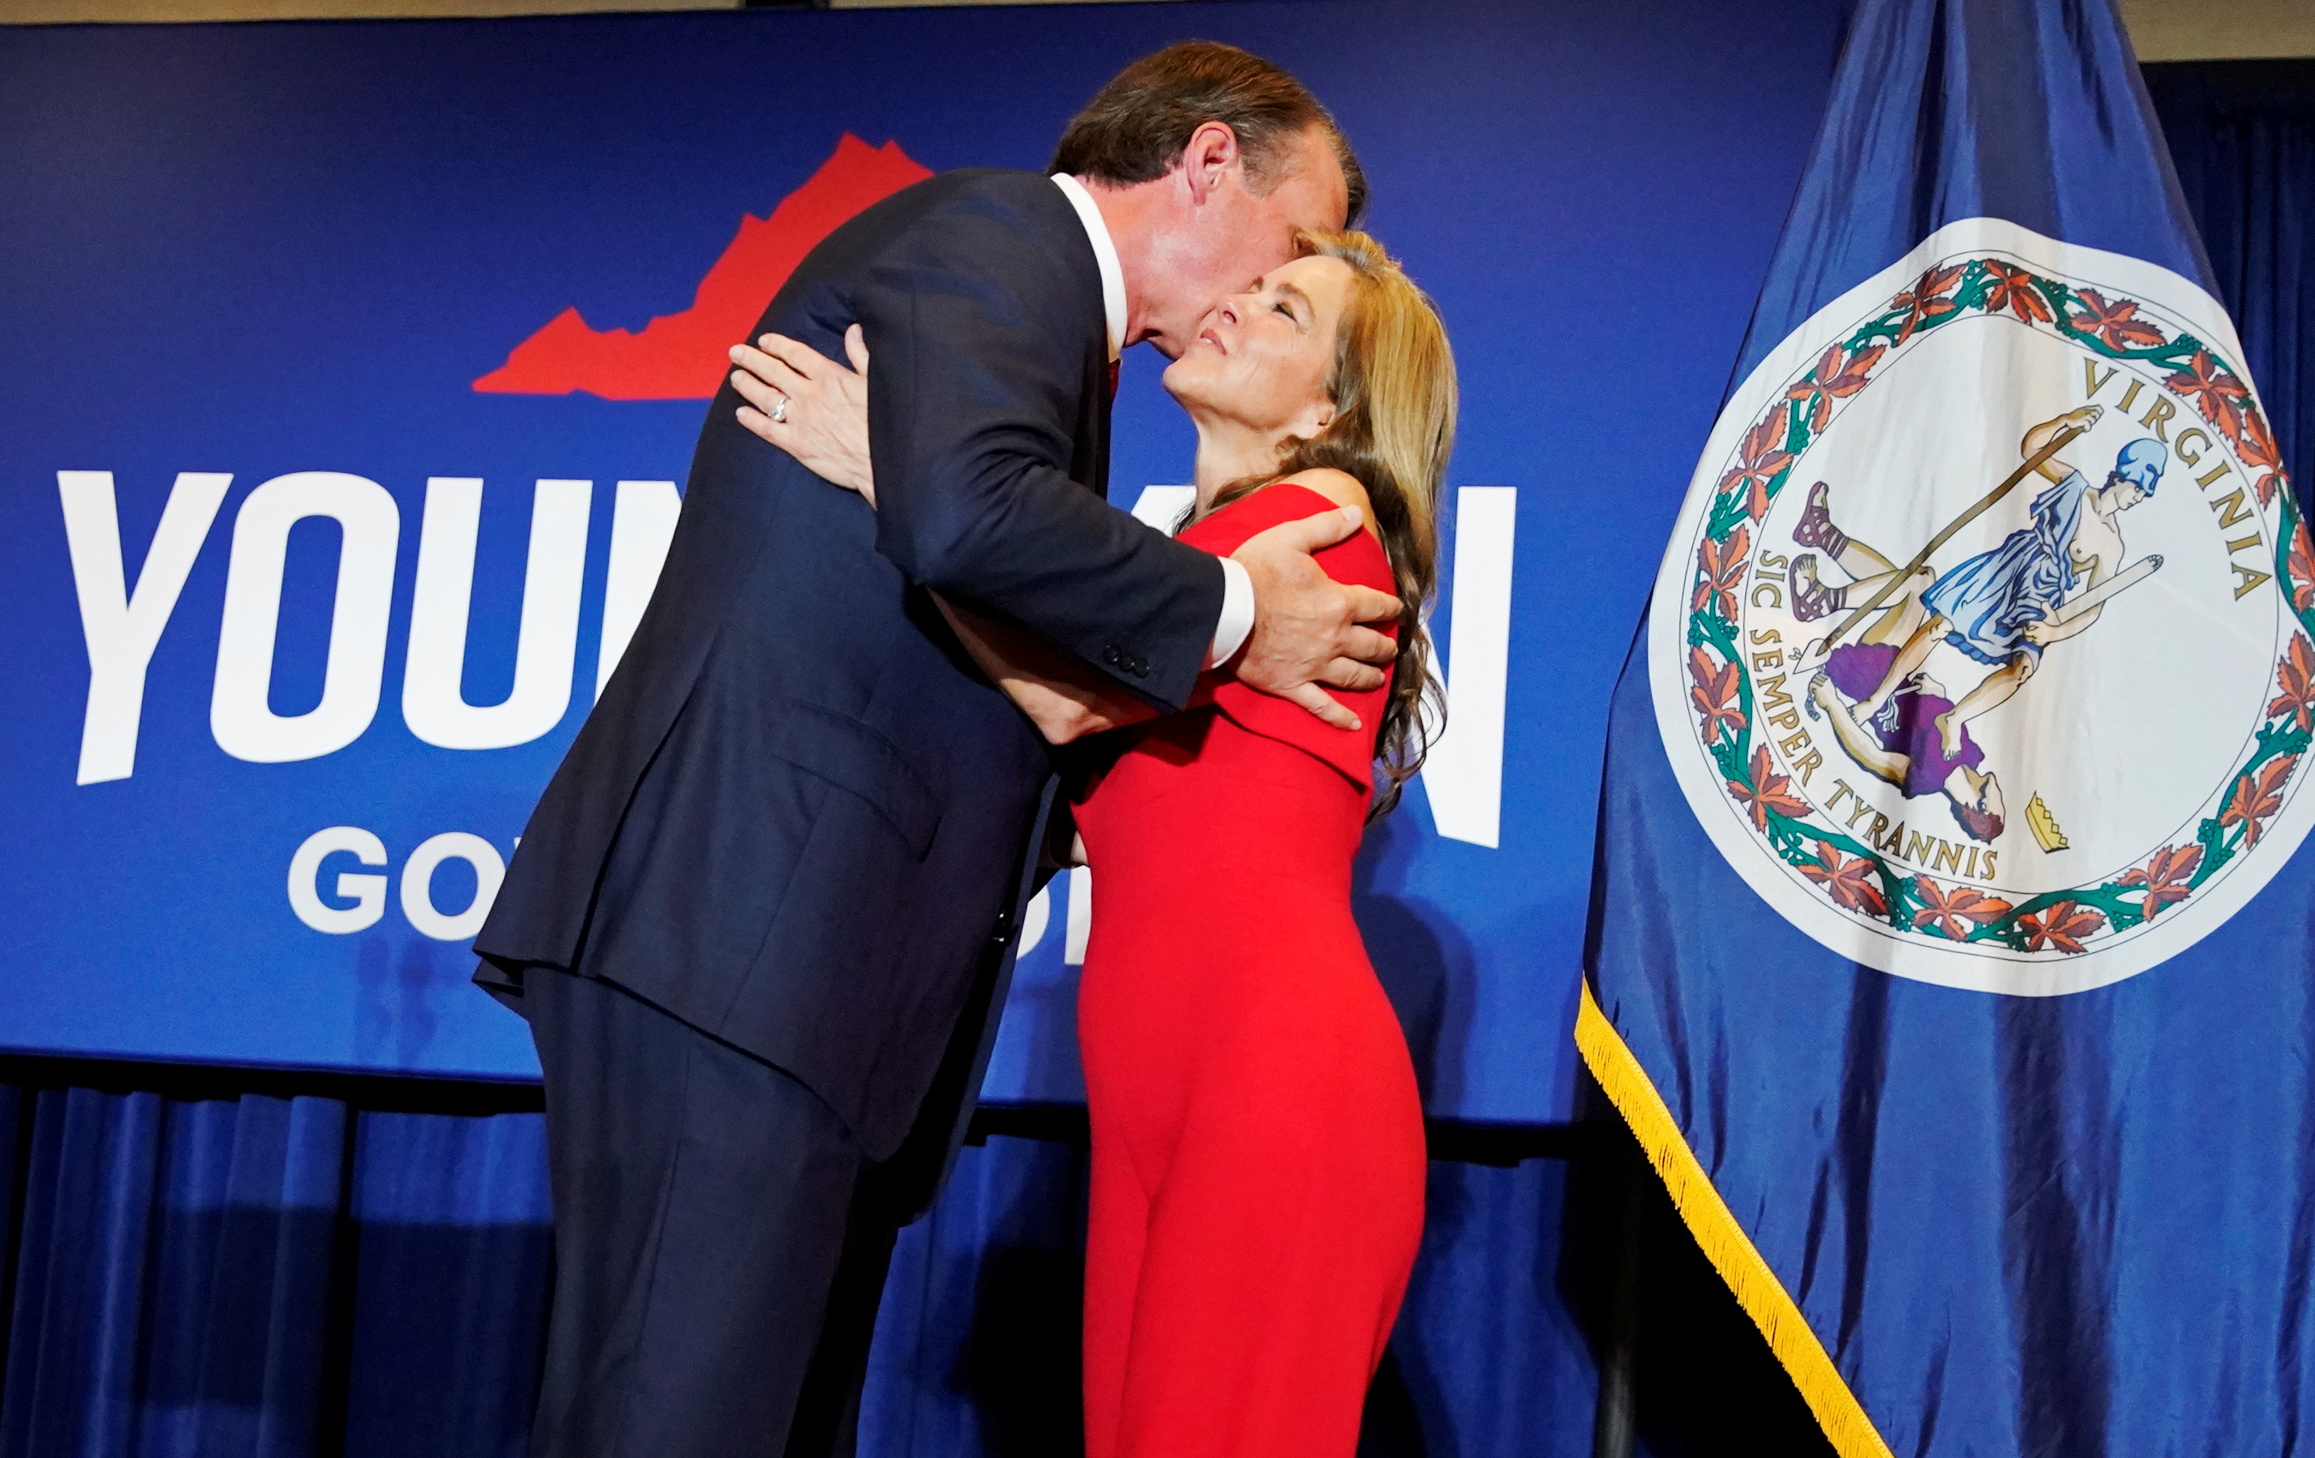 Virginia Republican gubernatorial nominee Glenn Youngkin hugs his wife Suzanne after addressing supporters during his election night party at a hotel in Chantilly, Virginia, U.S., November 3, 2021. REUTERS/ Elizabeth Frantz